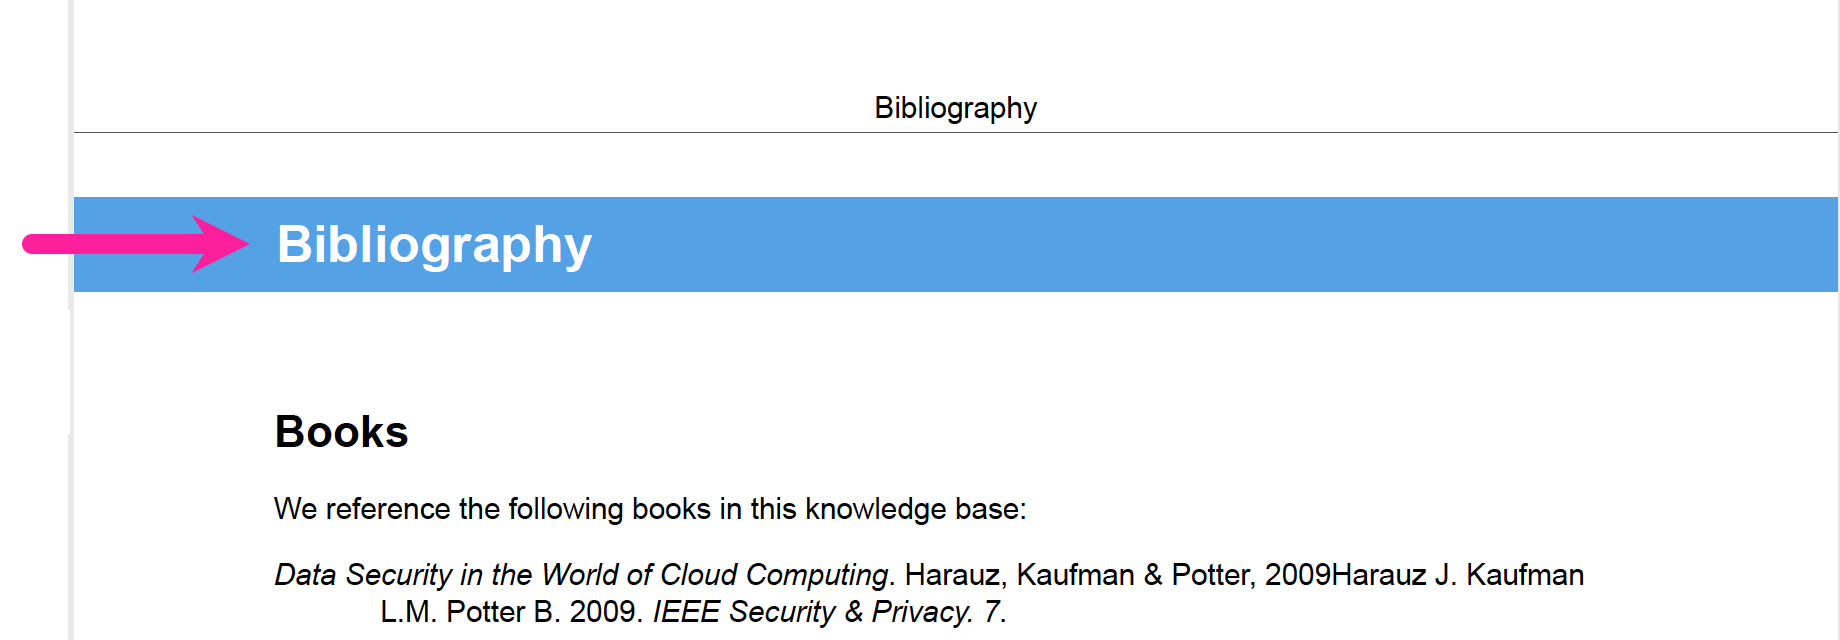 A topic with the title "Bibliography". Inside the topic, there is no second title. The auto-title feature is turned off.